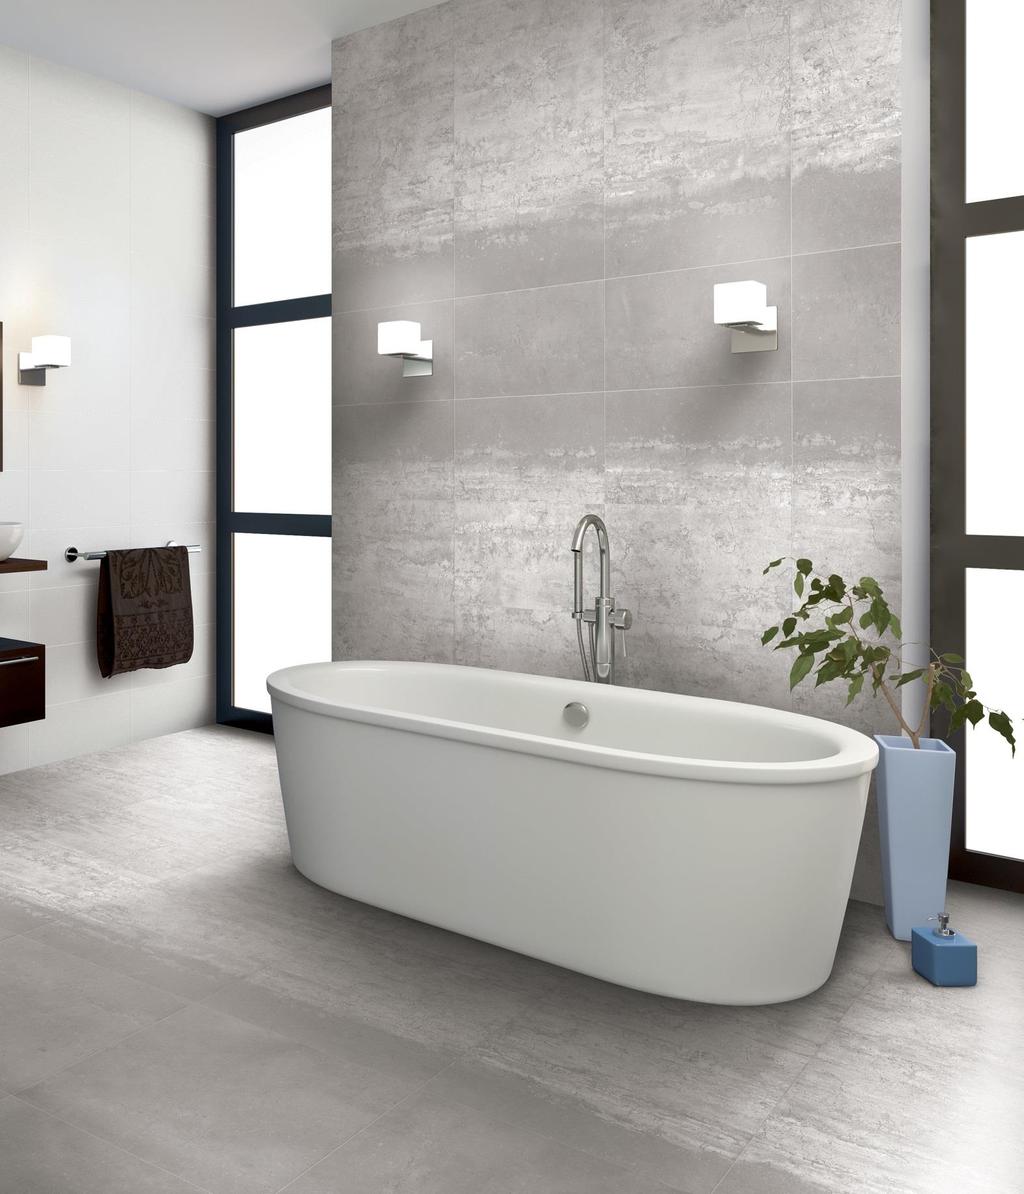 STONEWAY PORCELAIN TILE The Stoneway Collection is offered in a 12" x 24" and 2" x 2" mosaic in three colors.